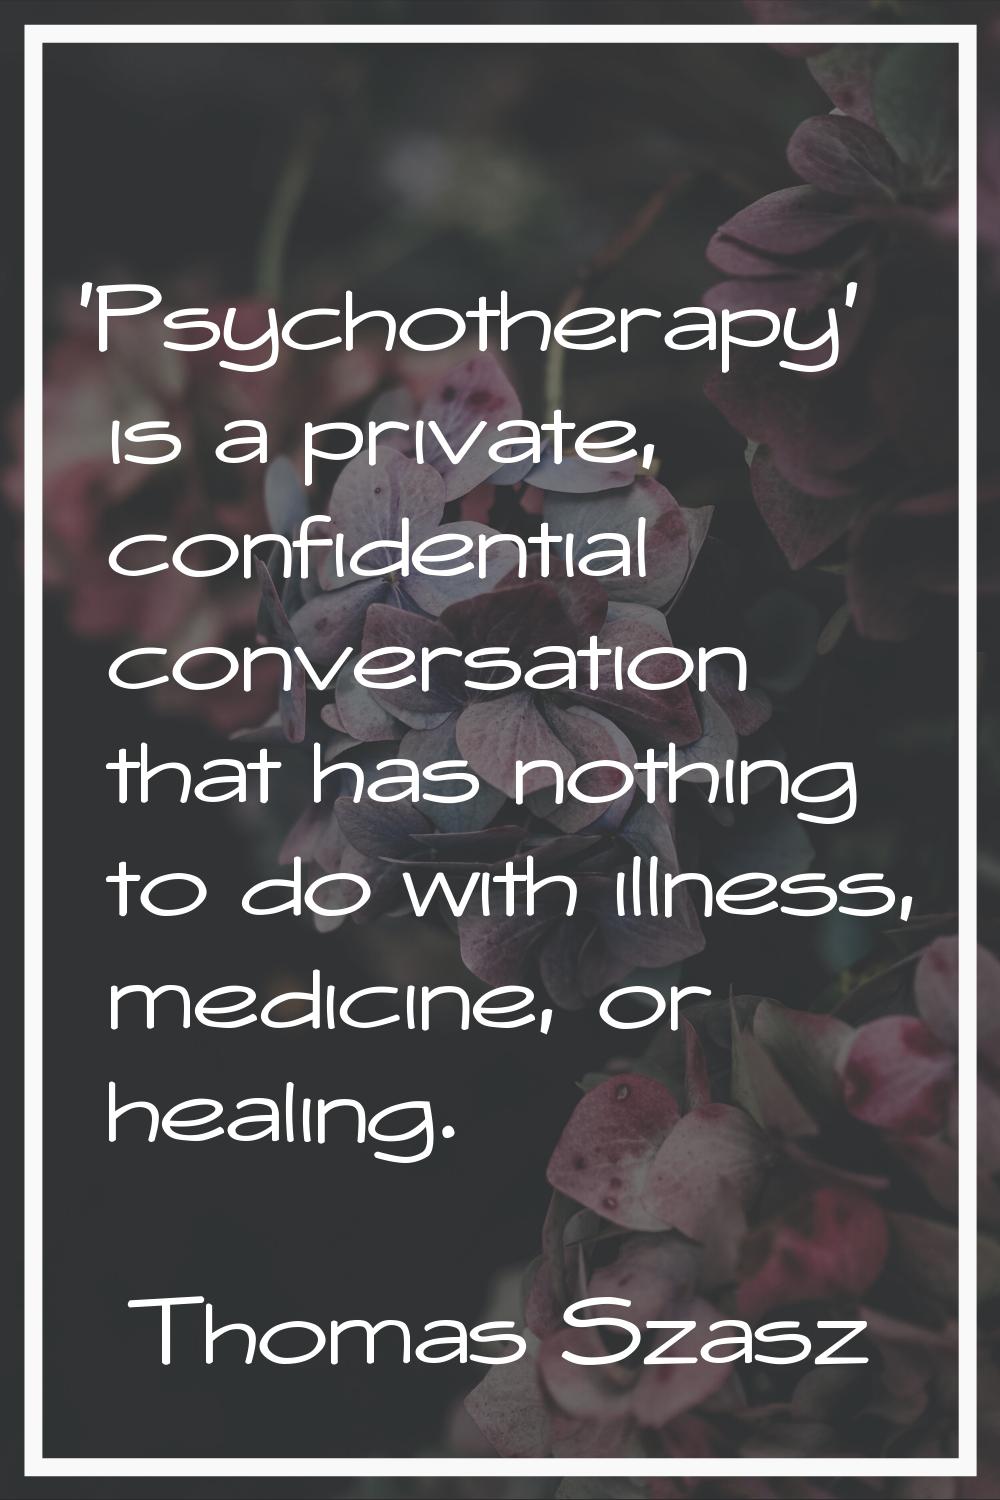 'Psychotherapy' is a private, confidential conversation that has nothing to do with illness, medici